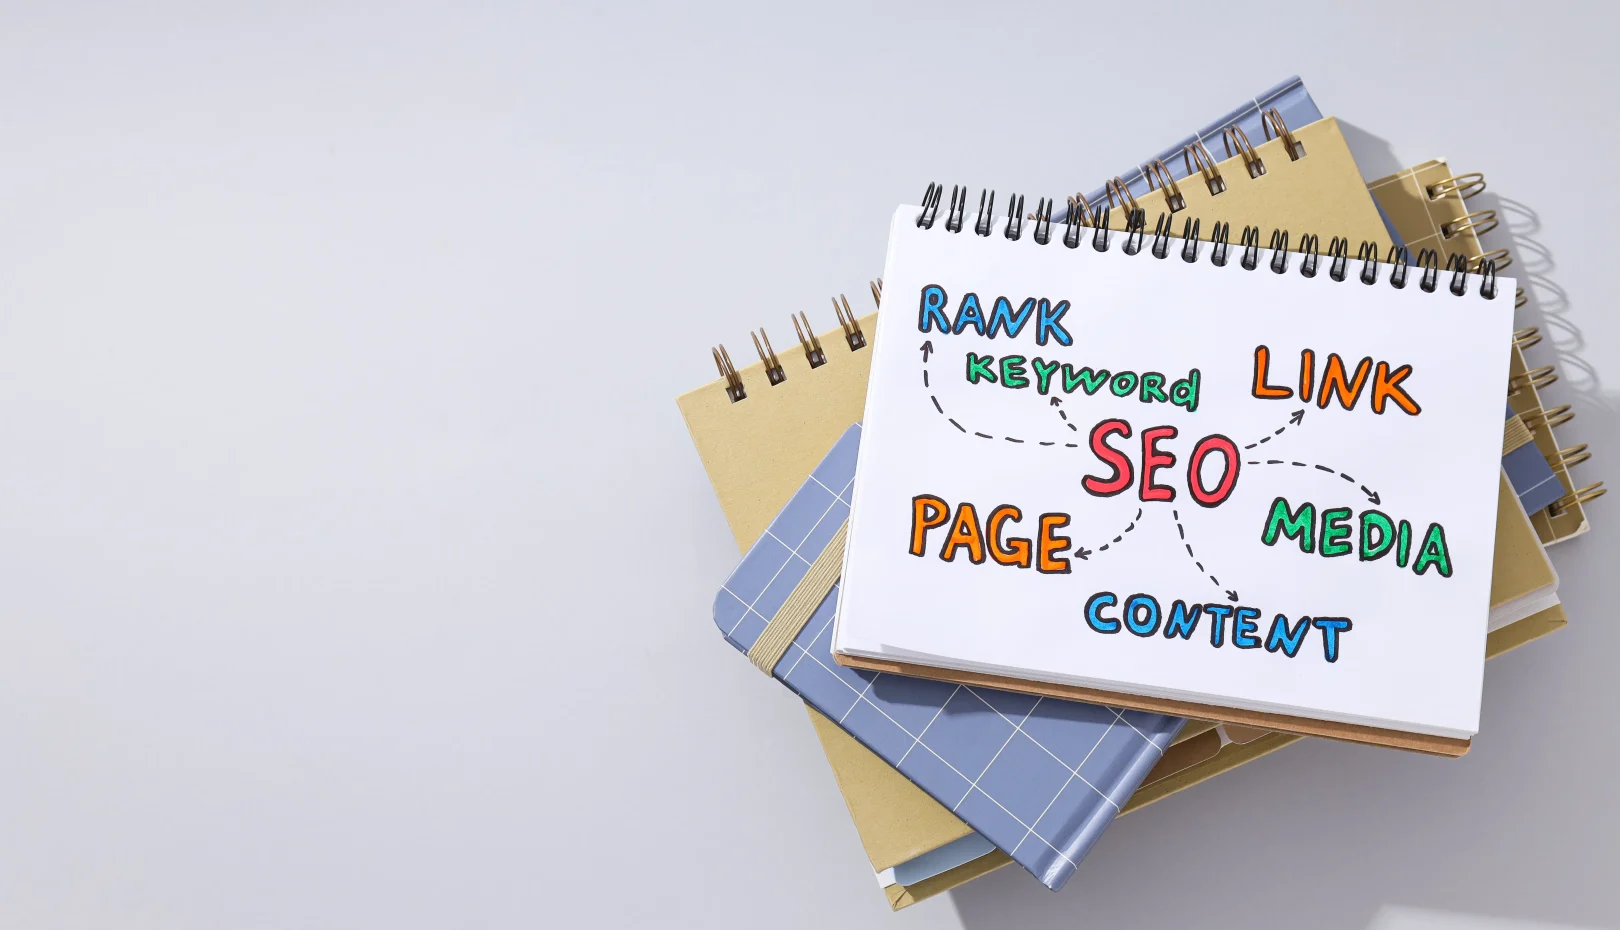 On-page seo, on page seo checklist, what is on page seo, on page seo techiques, on page seo factors, on page seo checker, which on page element carries the most weight for seo, on page seo tool, on page seo in hindi, on page seo meaning, on page seo optimization, on page seo kya hai, on page seo services, seo on page activities, what is on page seo in hindi, metadata, what is metadata, metadata meaning,